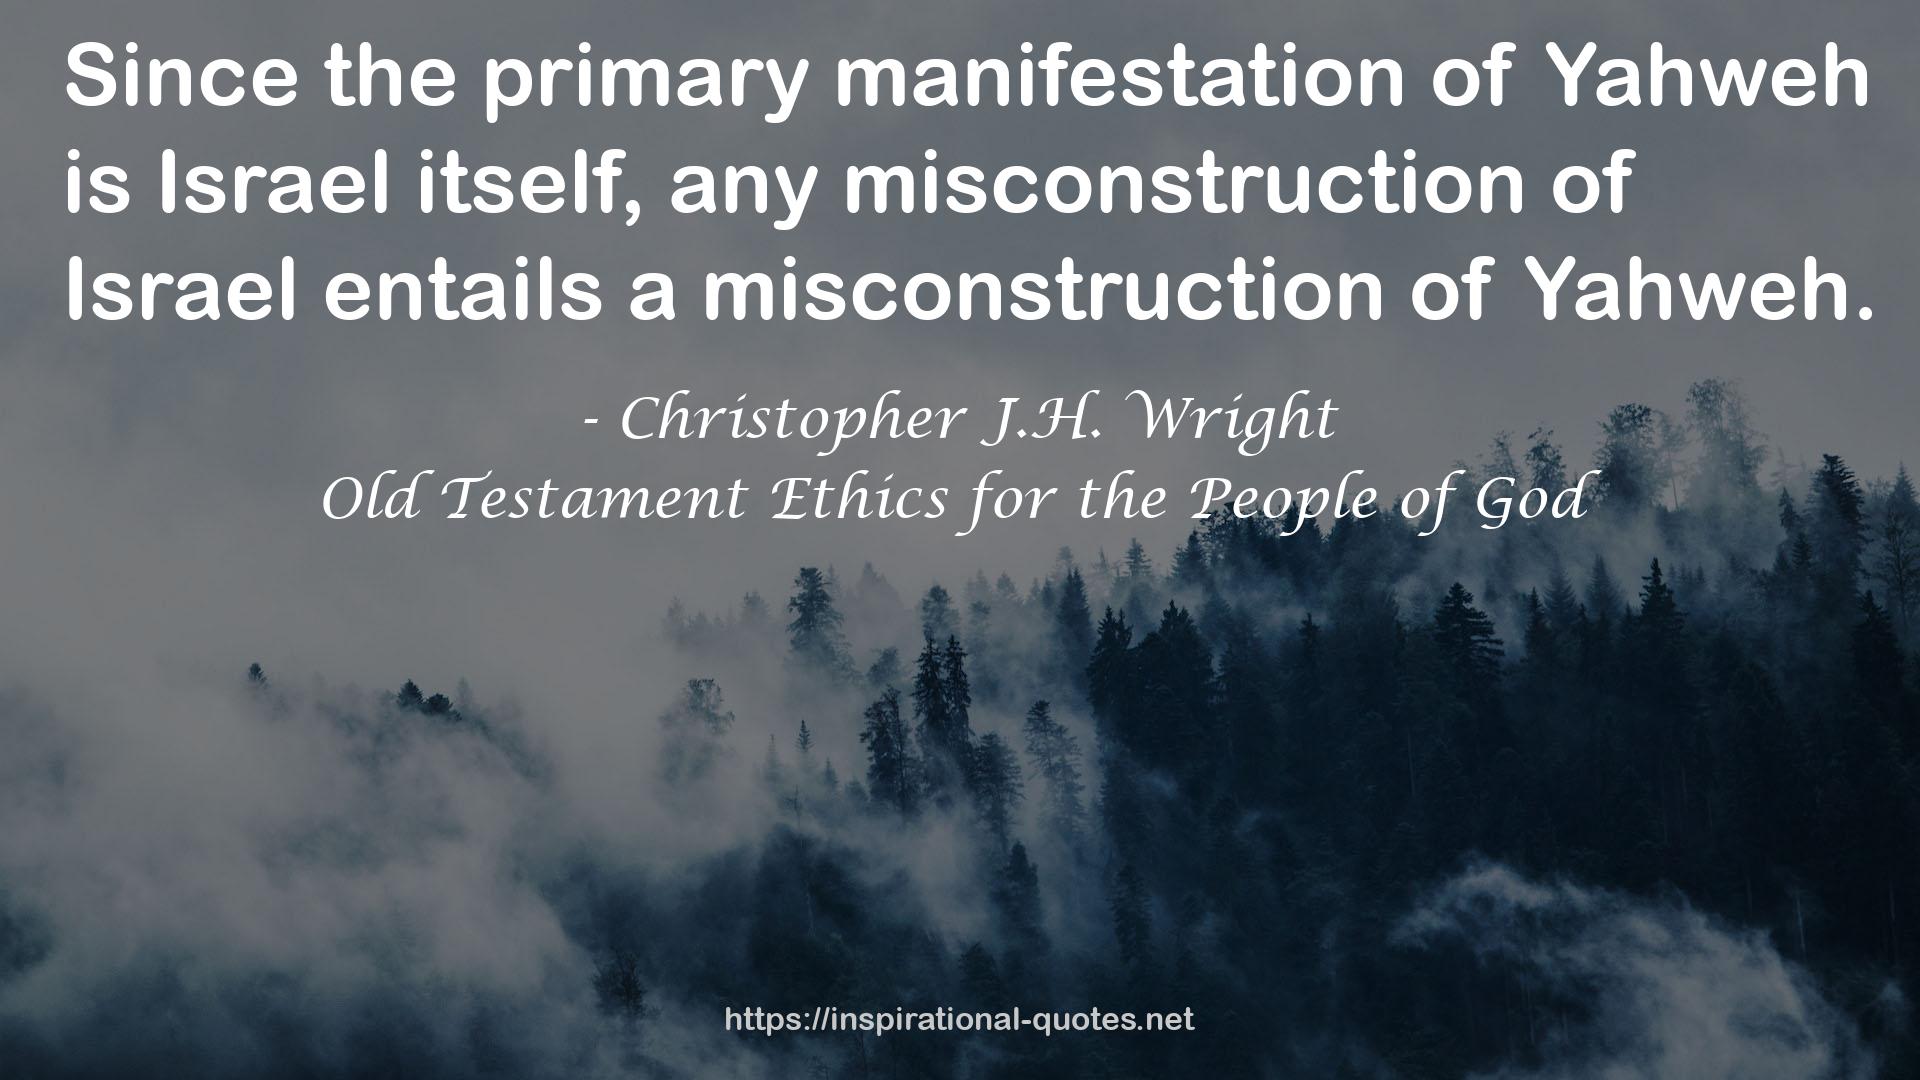 Christopher J.H. Wright QUOTES